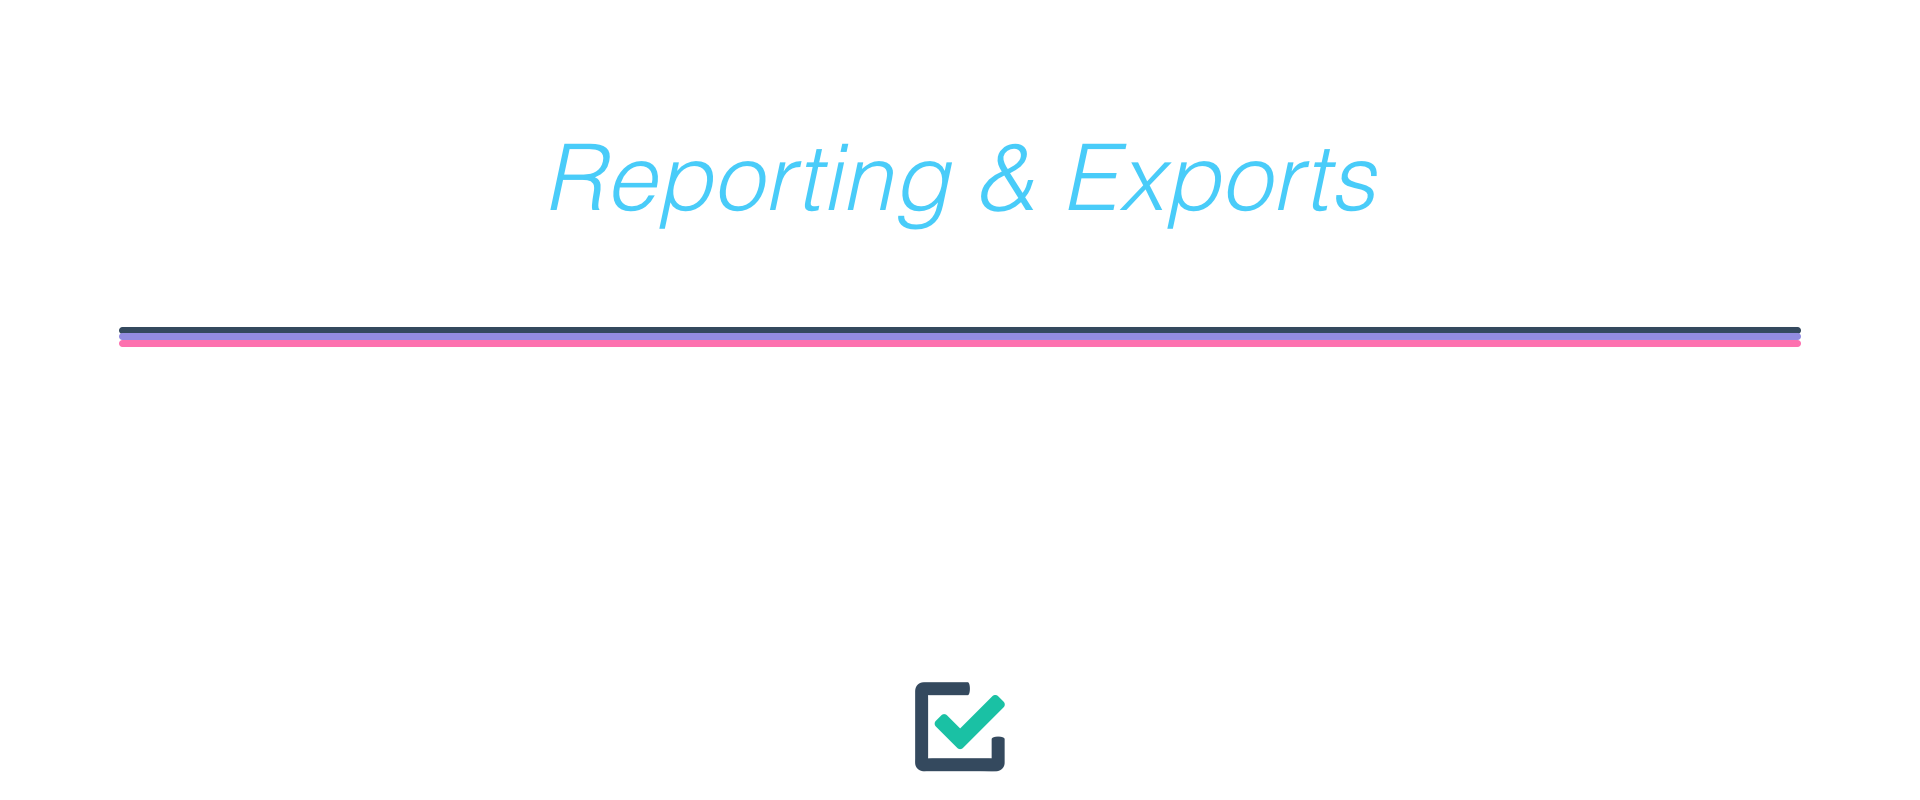 Reporting exports